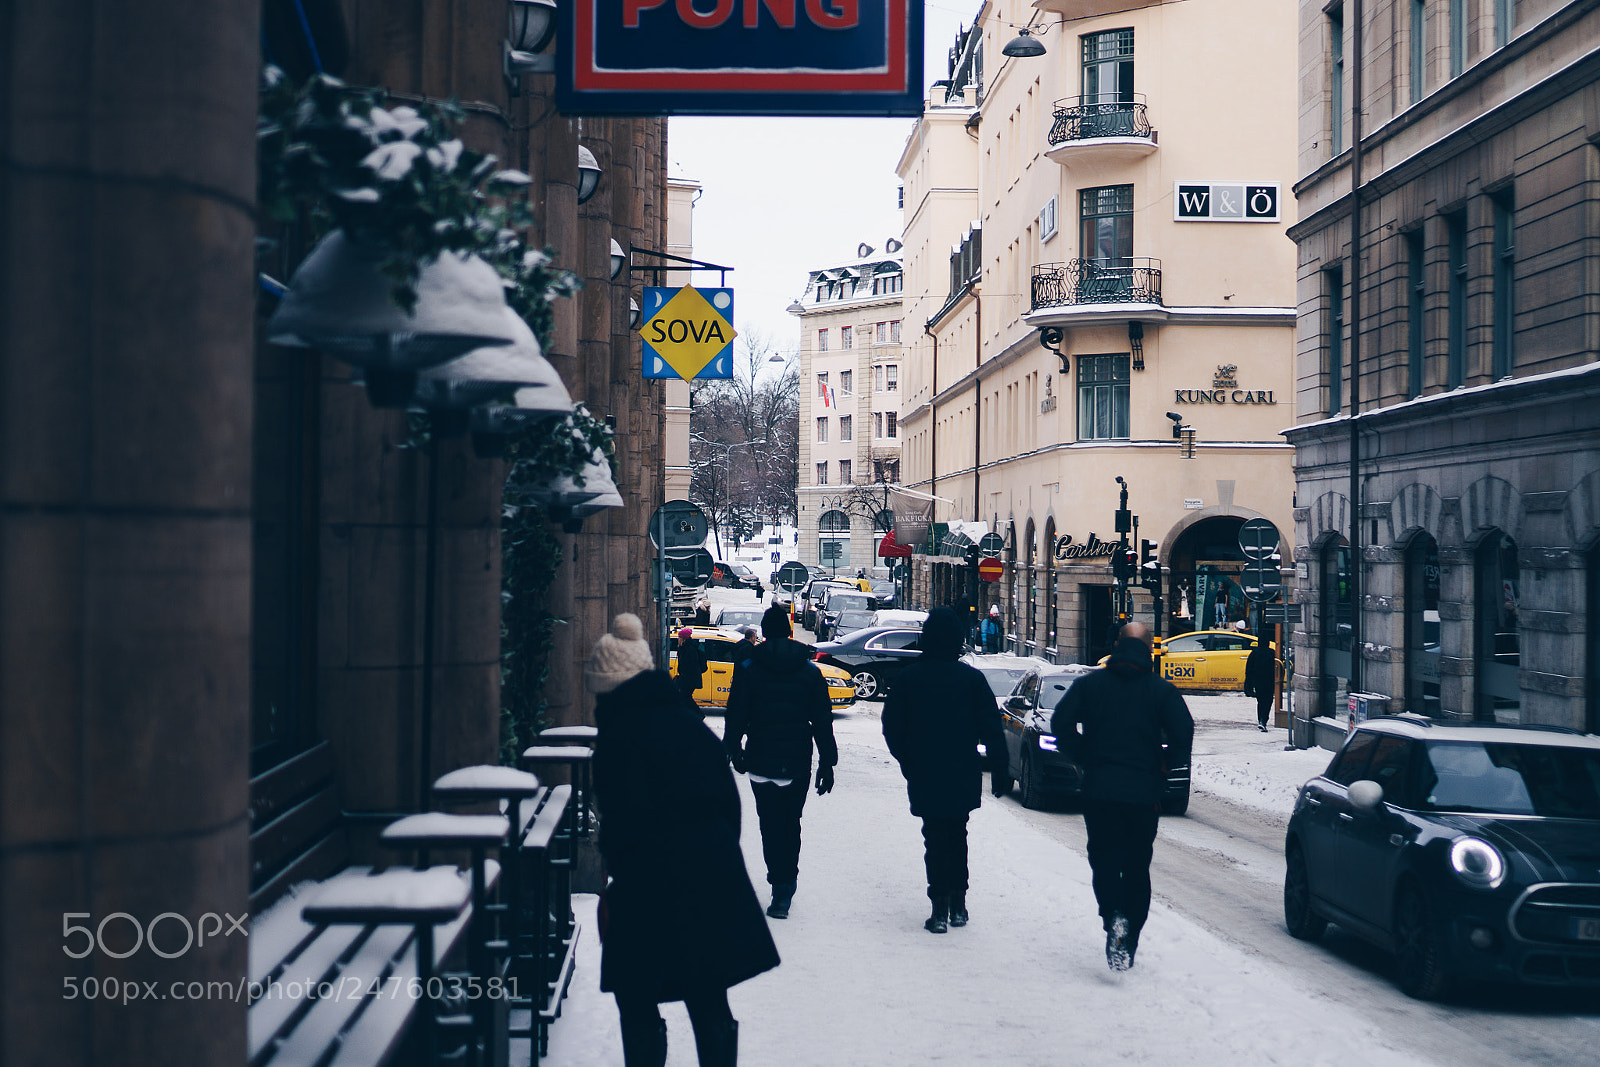 Sony a6300 sample photo. Cold in stockholm : street 2 photography